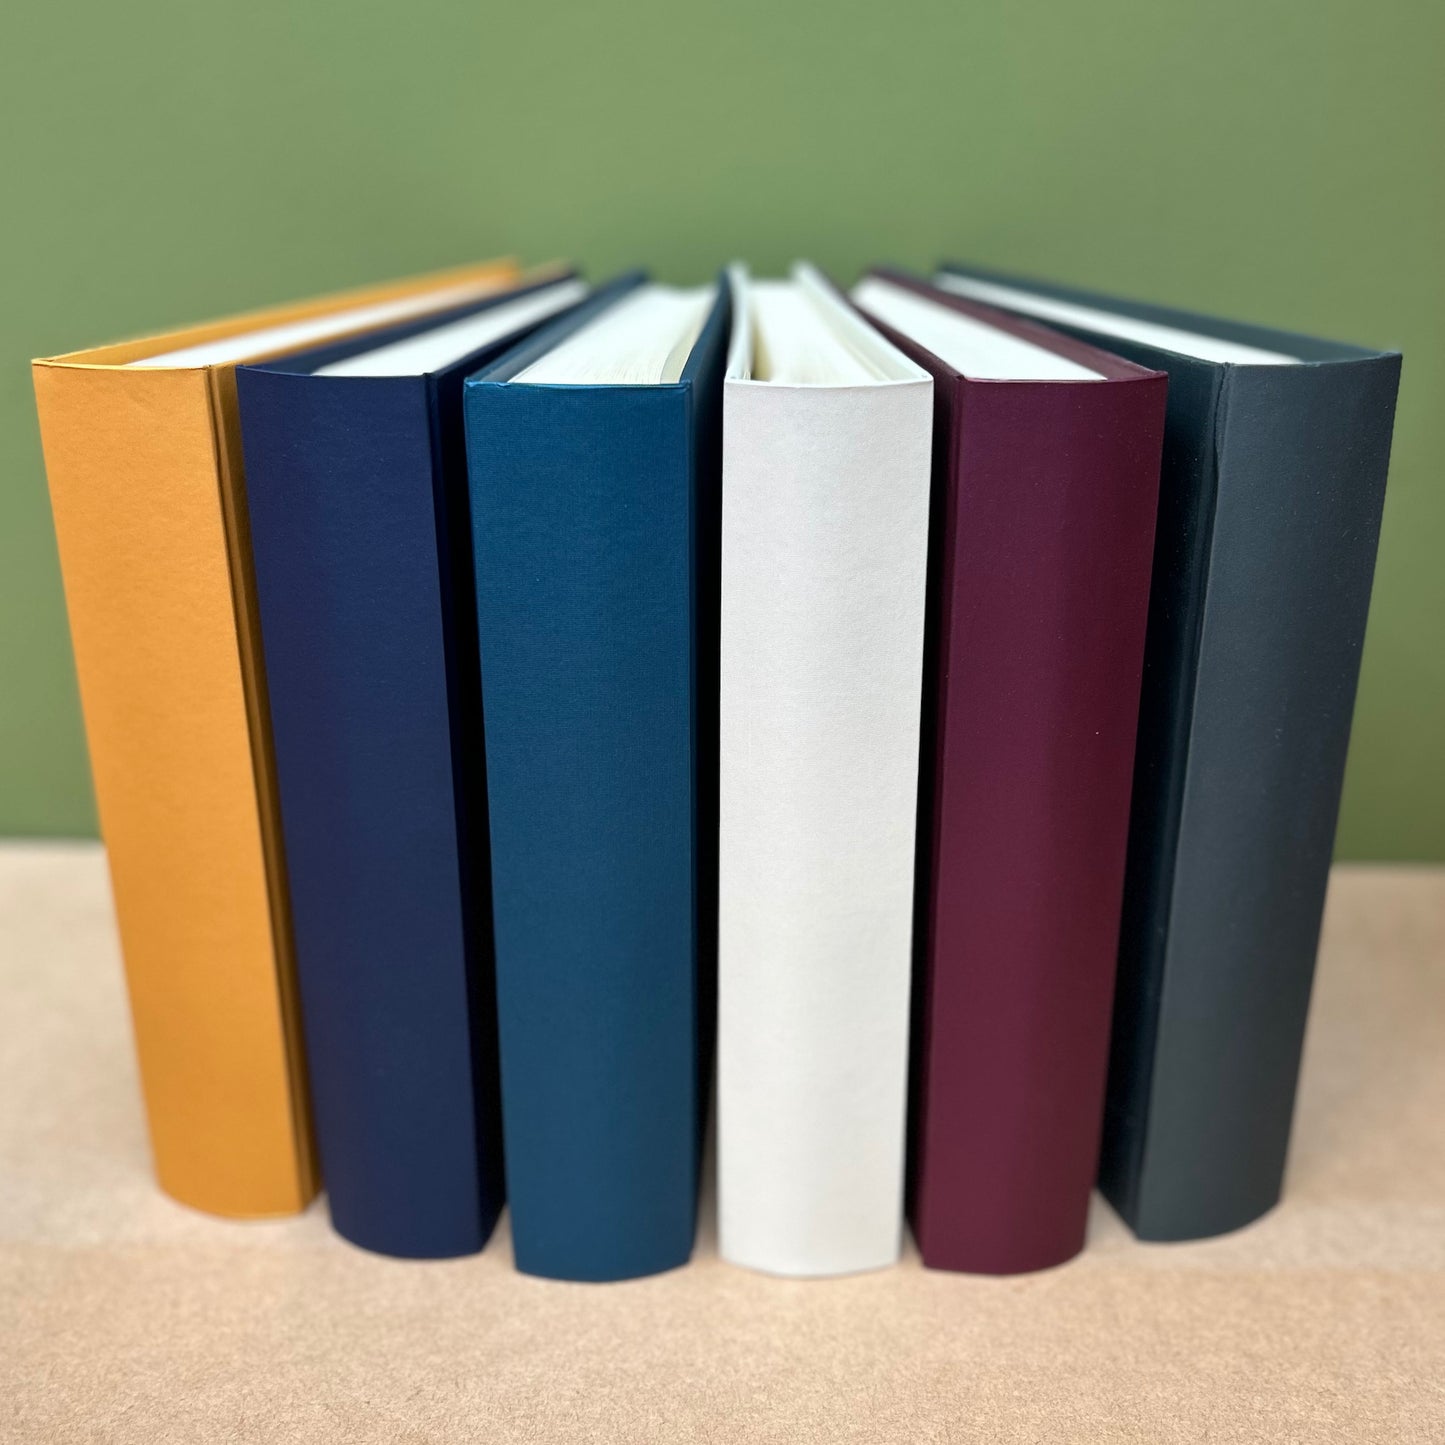 all of the six colour variations are shown here. Six photo albums are standing on their ends so you can see how the different colours look together 